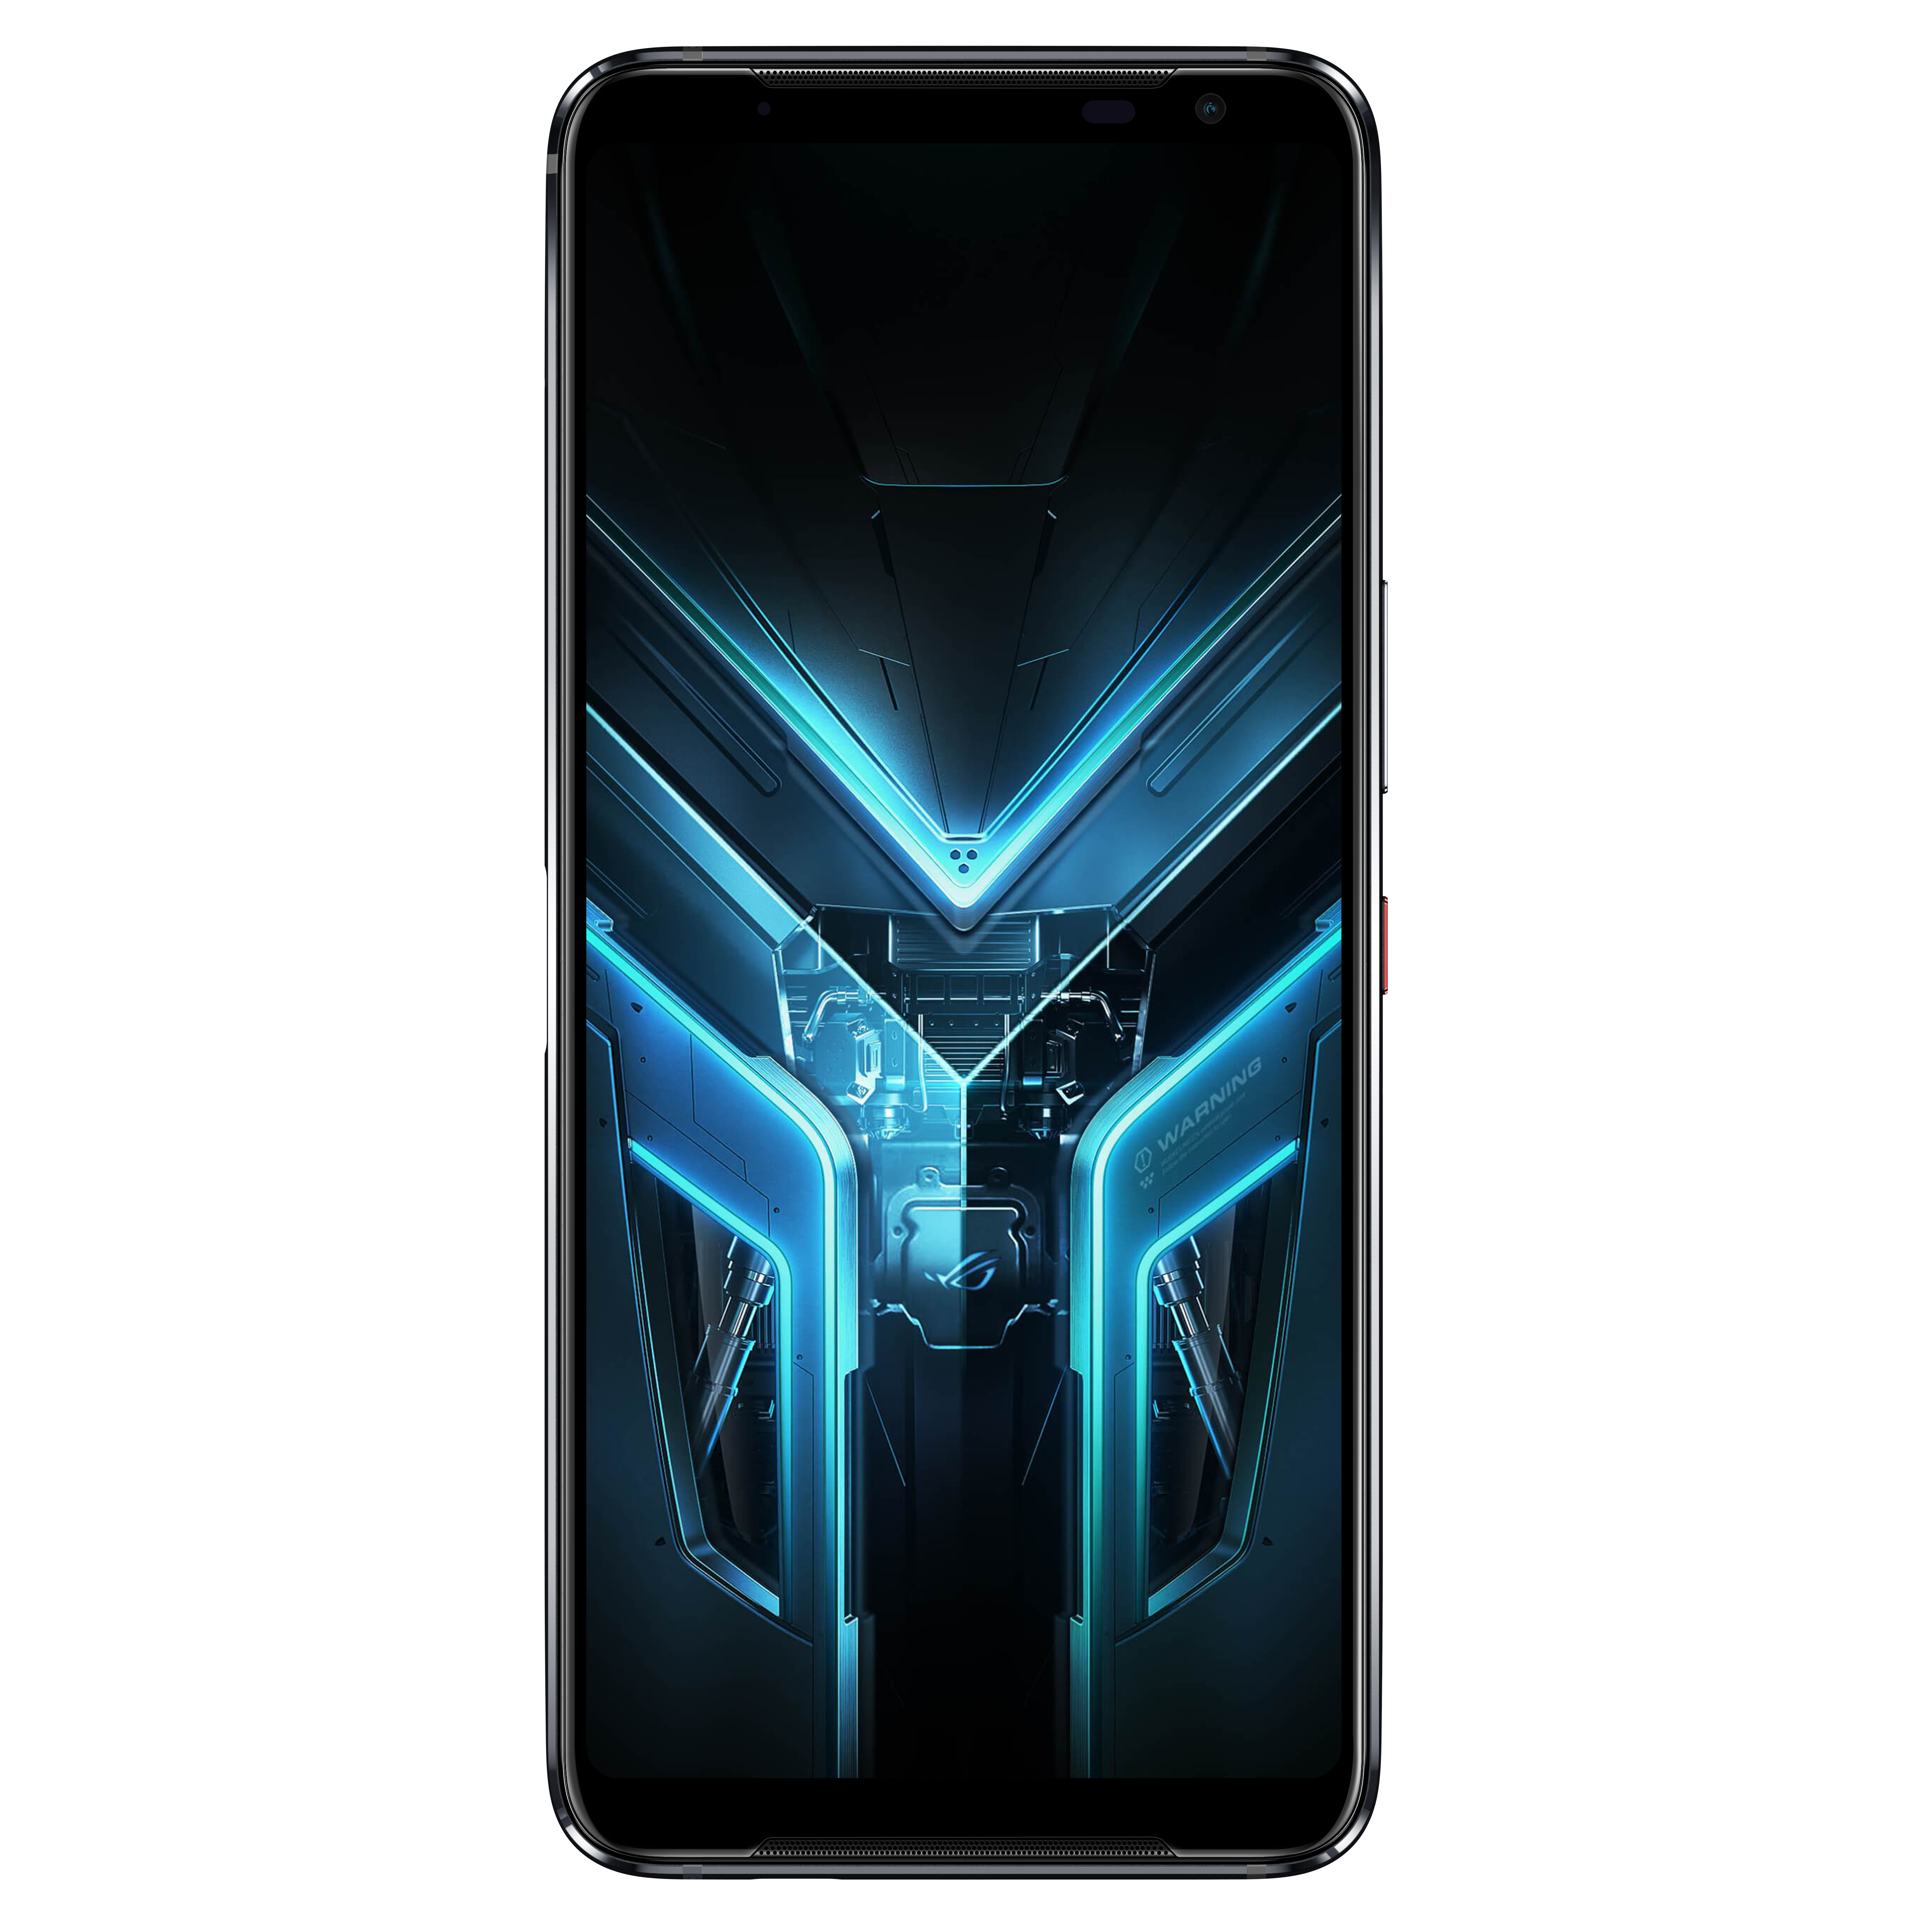 Asus ROG Phone 3 with Snapdragon 865+, 6,000 mAh battery, and 144 